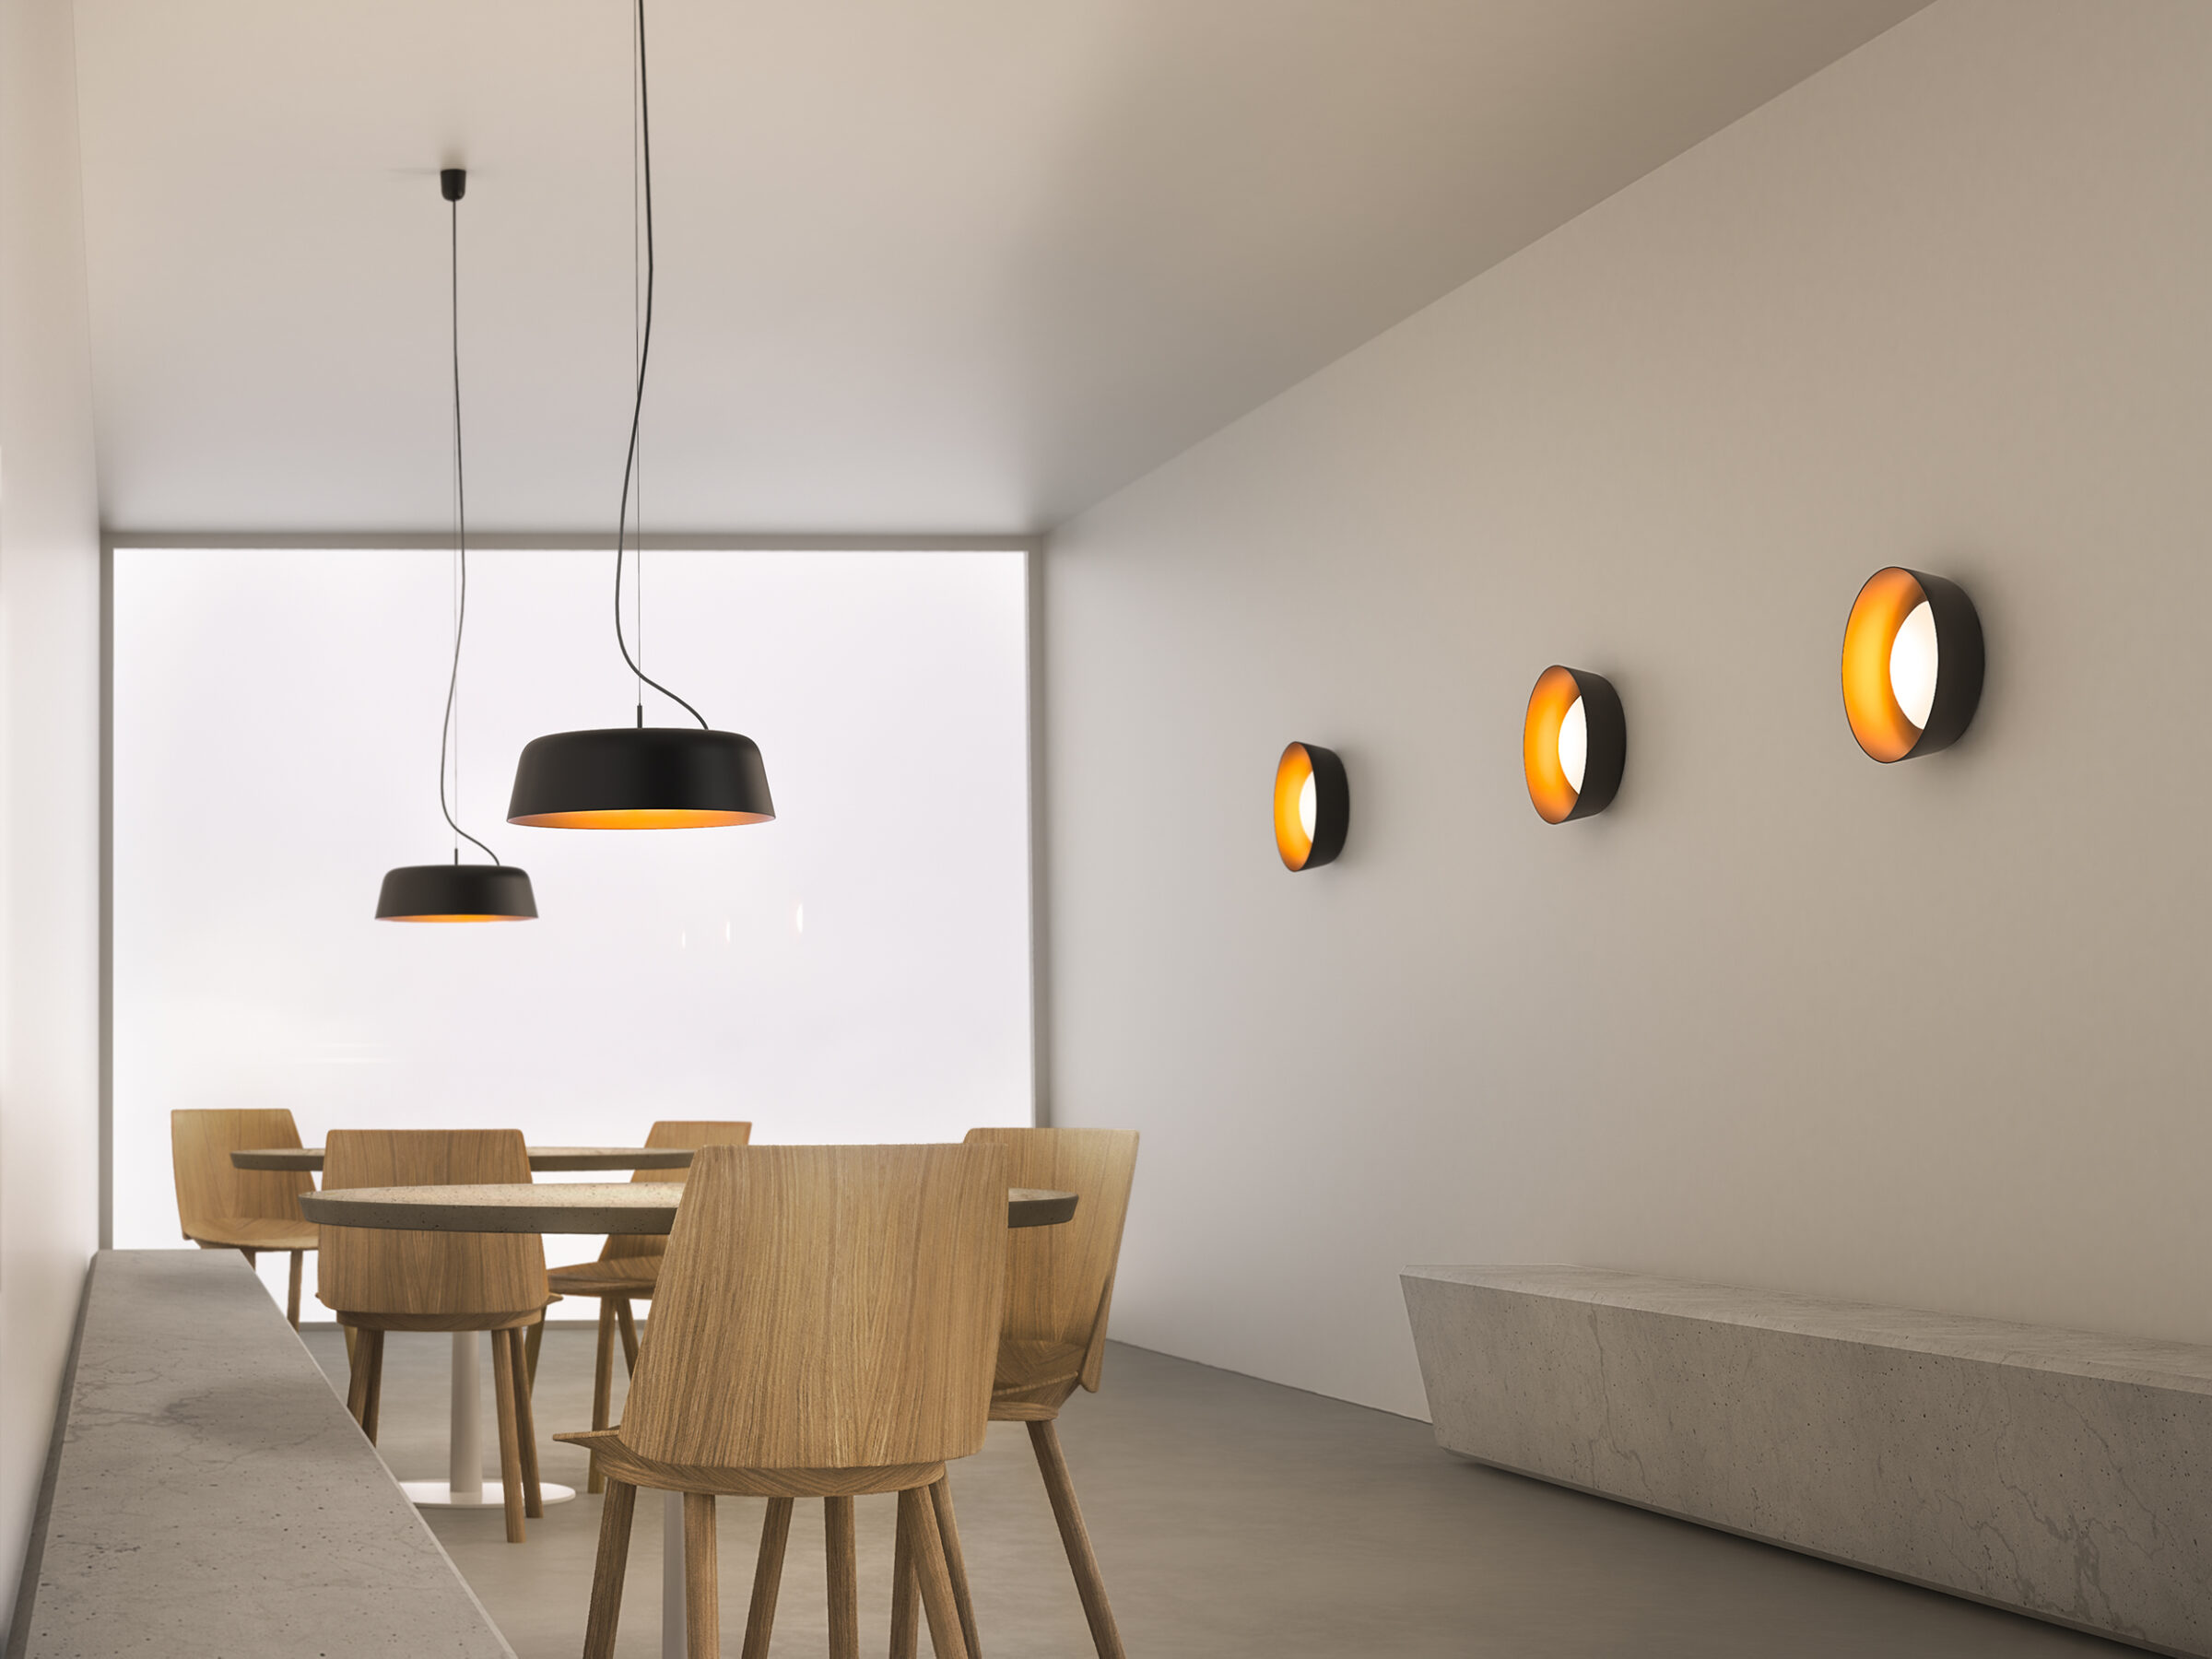 Bowl pendant lamps and wall lamps in a modern café interior